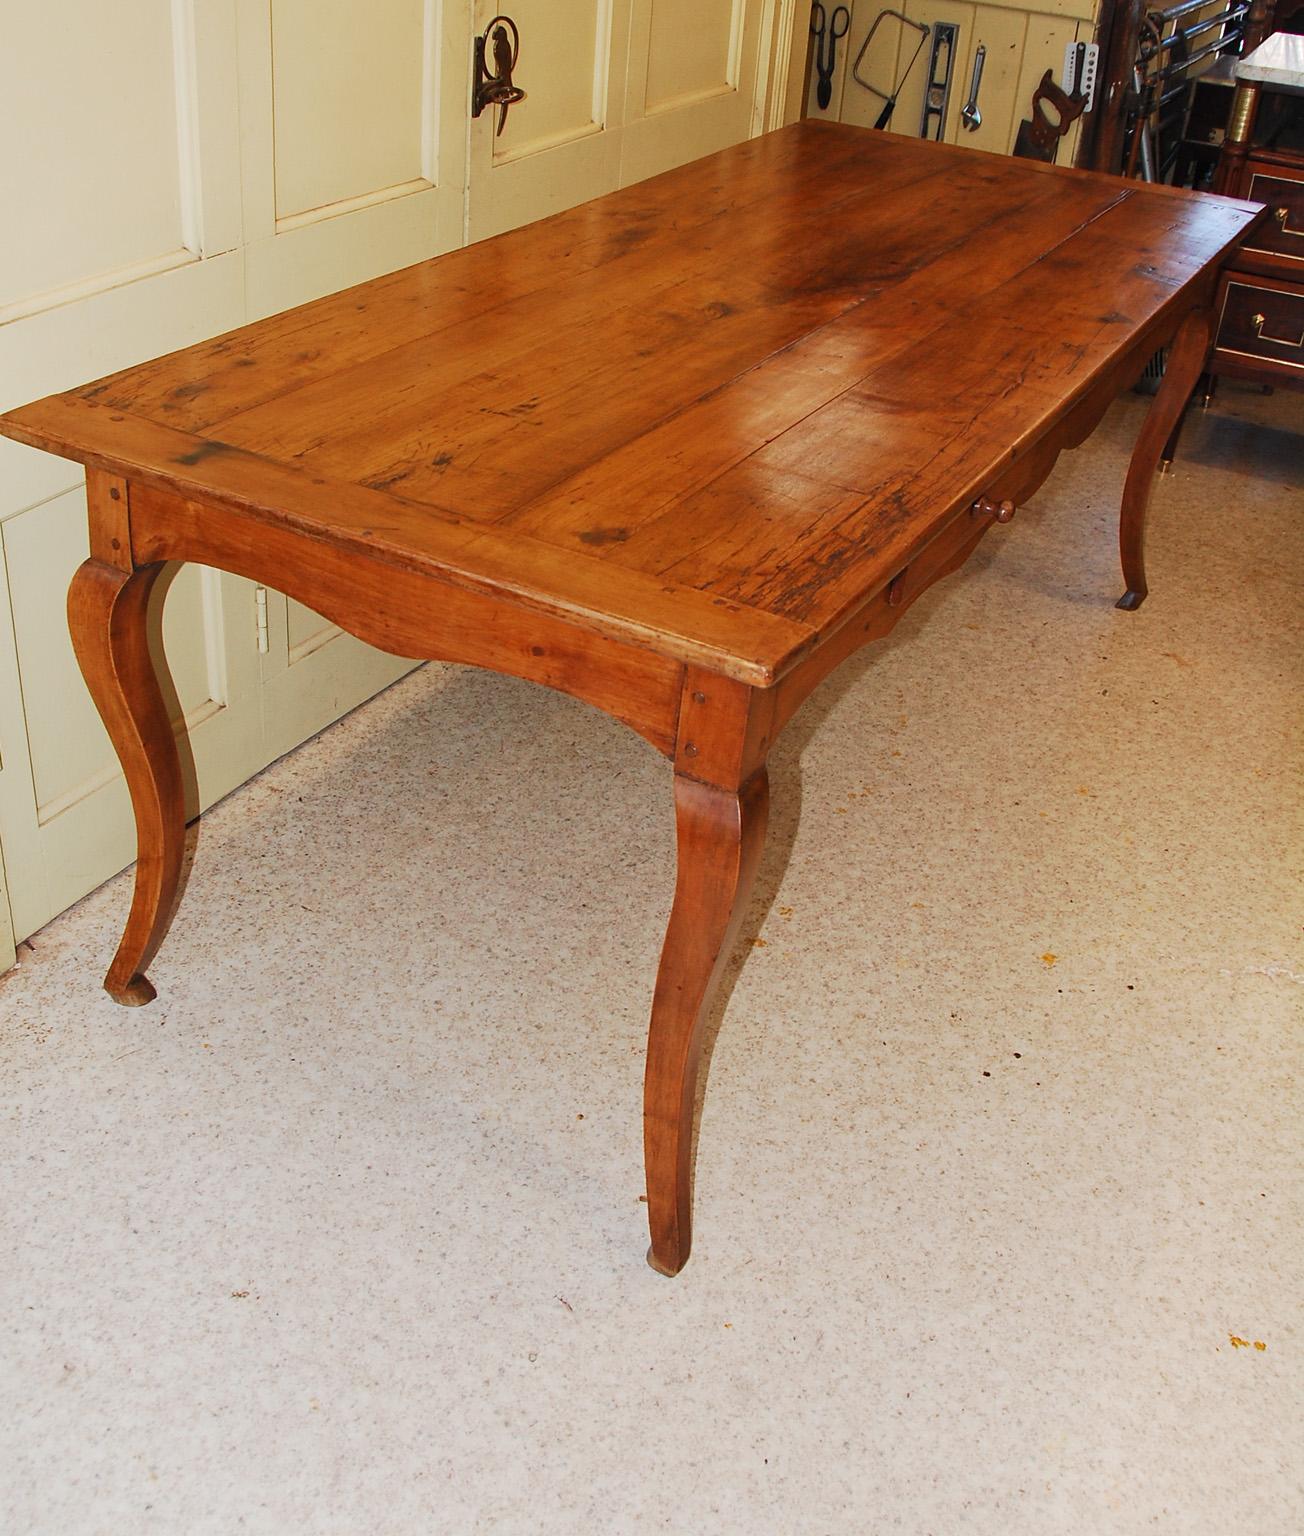 French provincial cherry farm house table from the Burgundy region of France. This table is earlier than most farm house tables that we come across and is a handsome example of a country table that has been well cared for throughout its life.